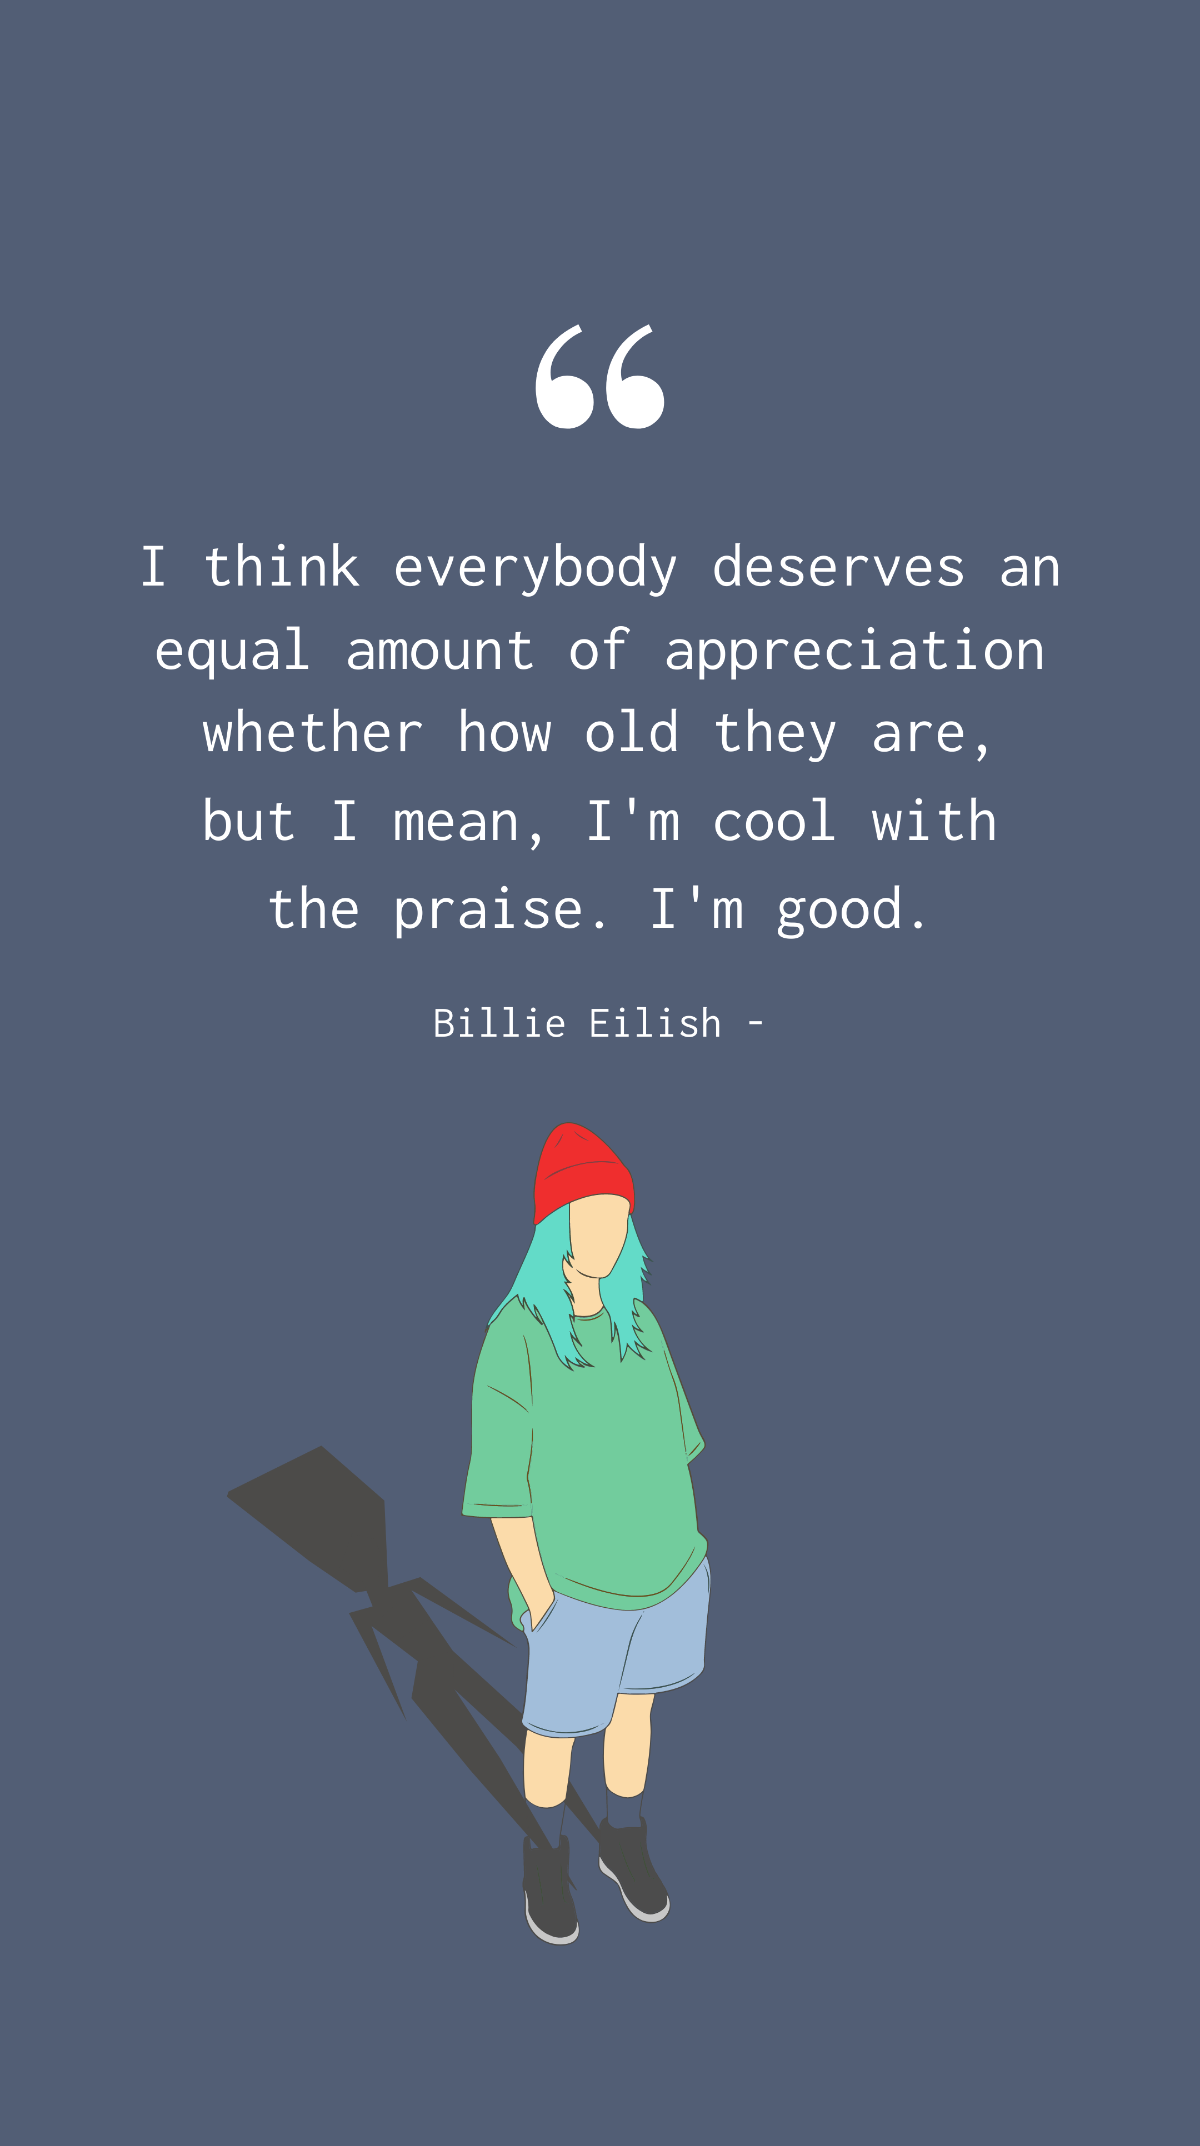 Billie Eilish - I think everybody deserves an equal amount of appreciation whether how old they are, but I mean, I'm cool with the praise. I'm good. Template